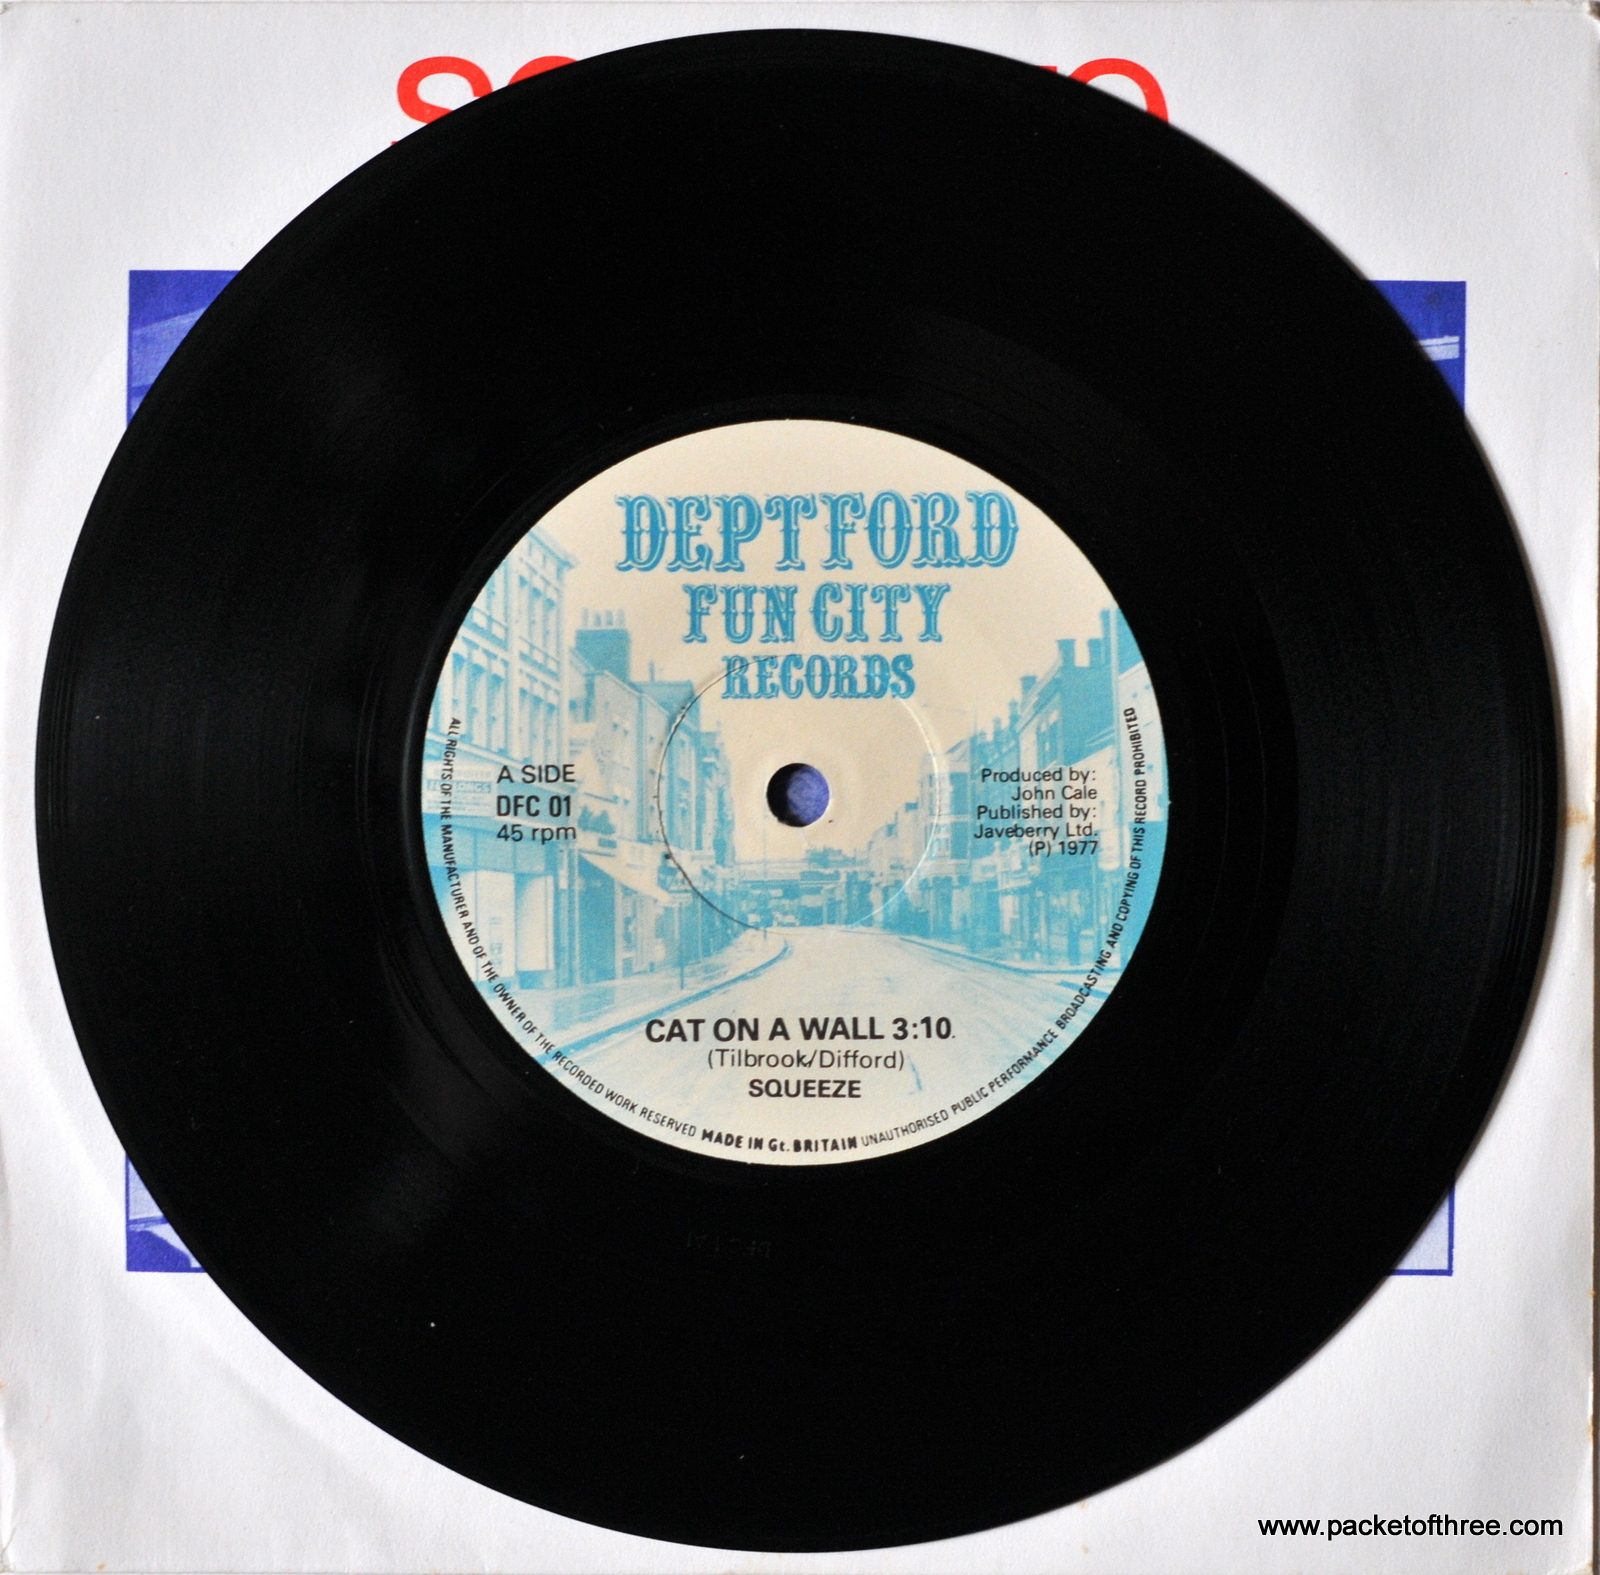 DFC 001 Packet of Three - UK - 7" picture sleeve